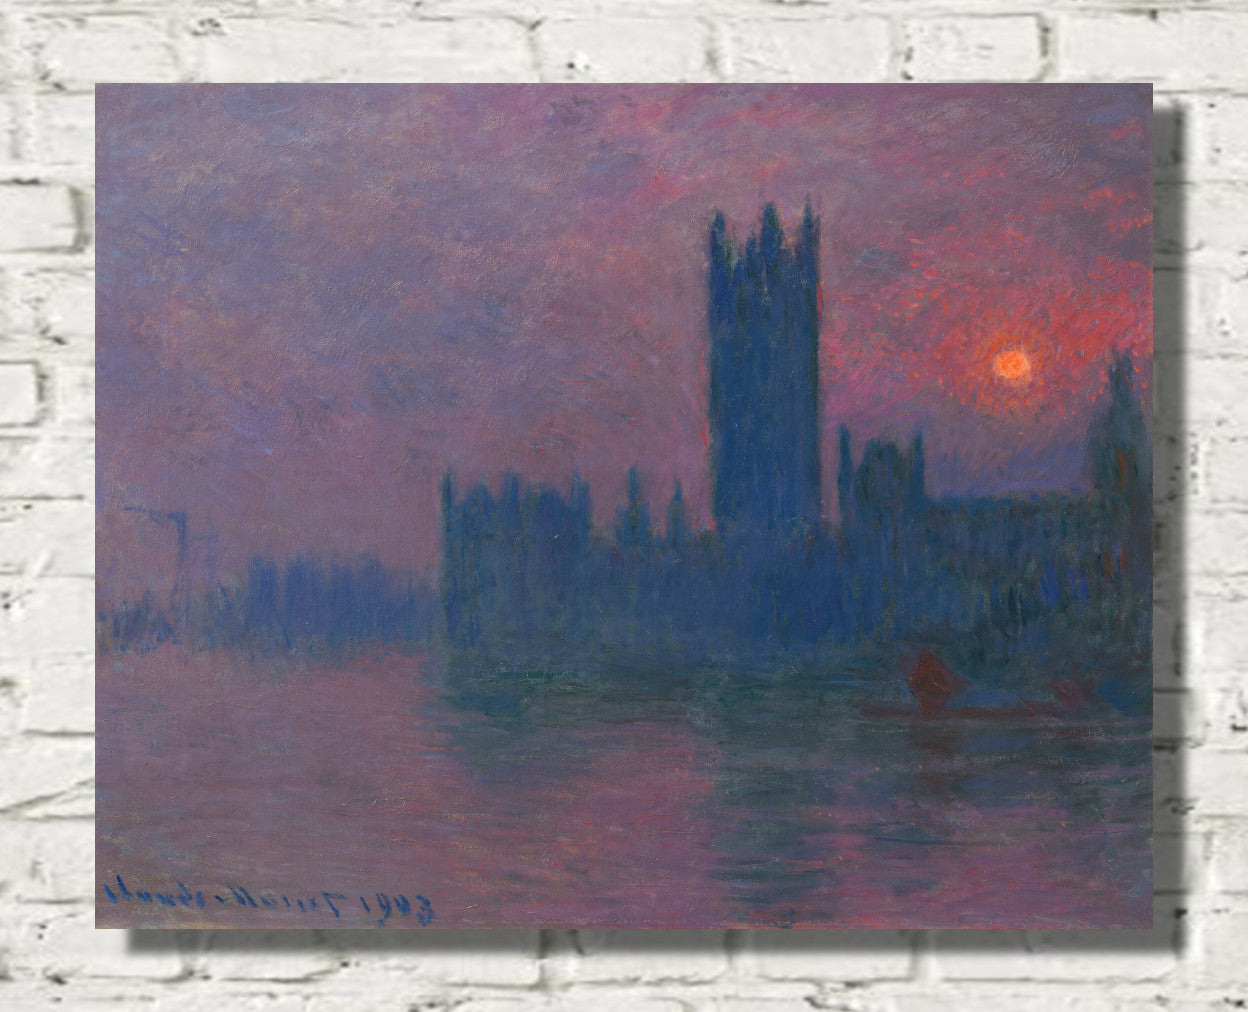 Houses of Parliament, the Setting Sun by Claude Monet